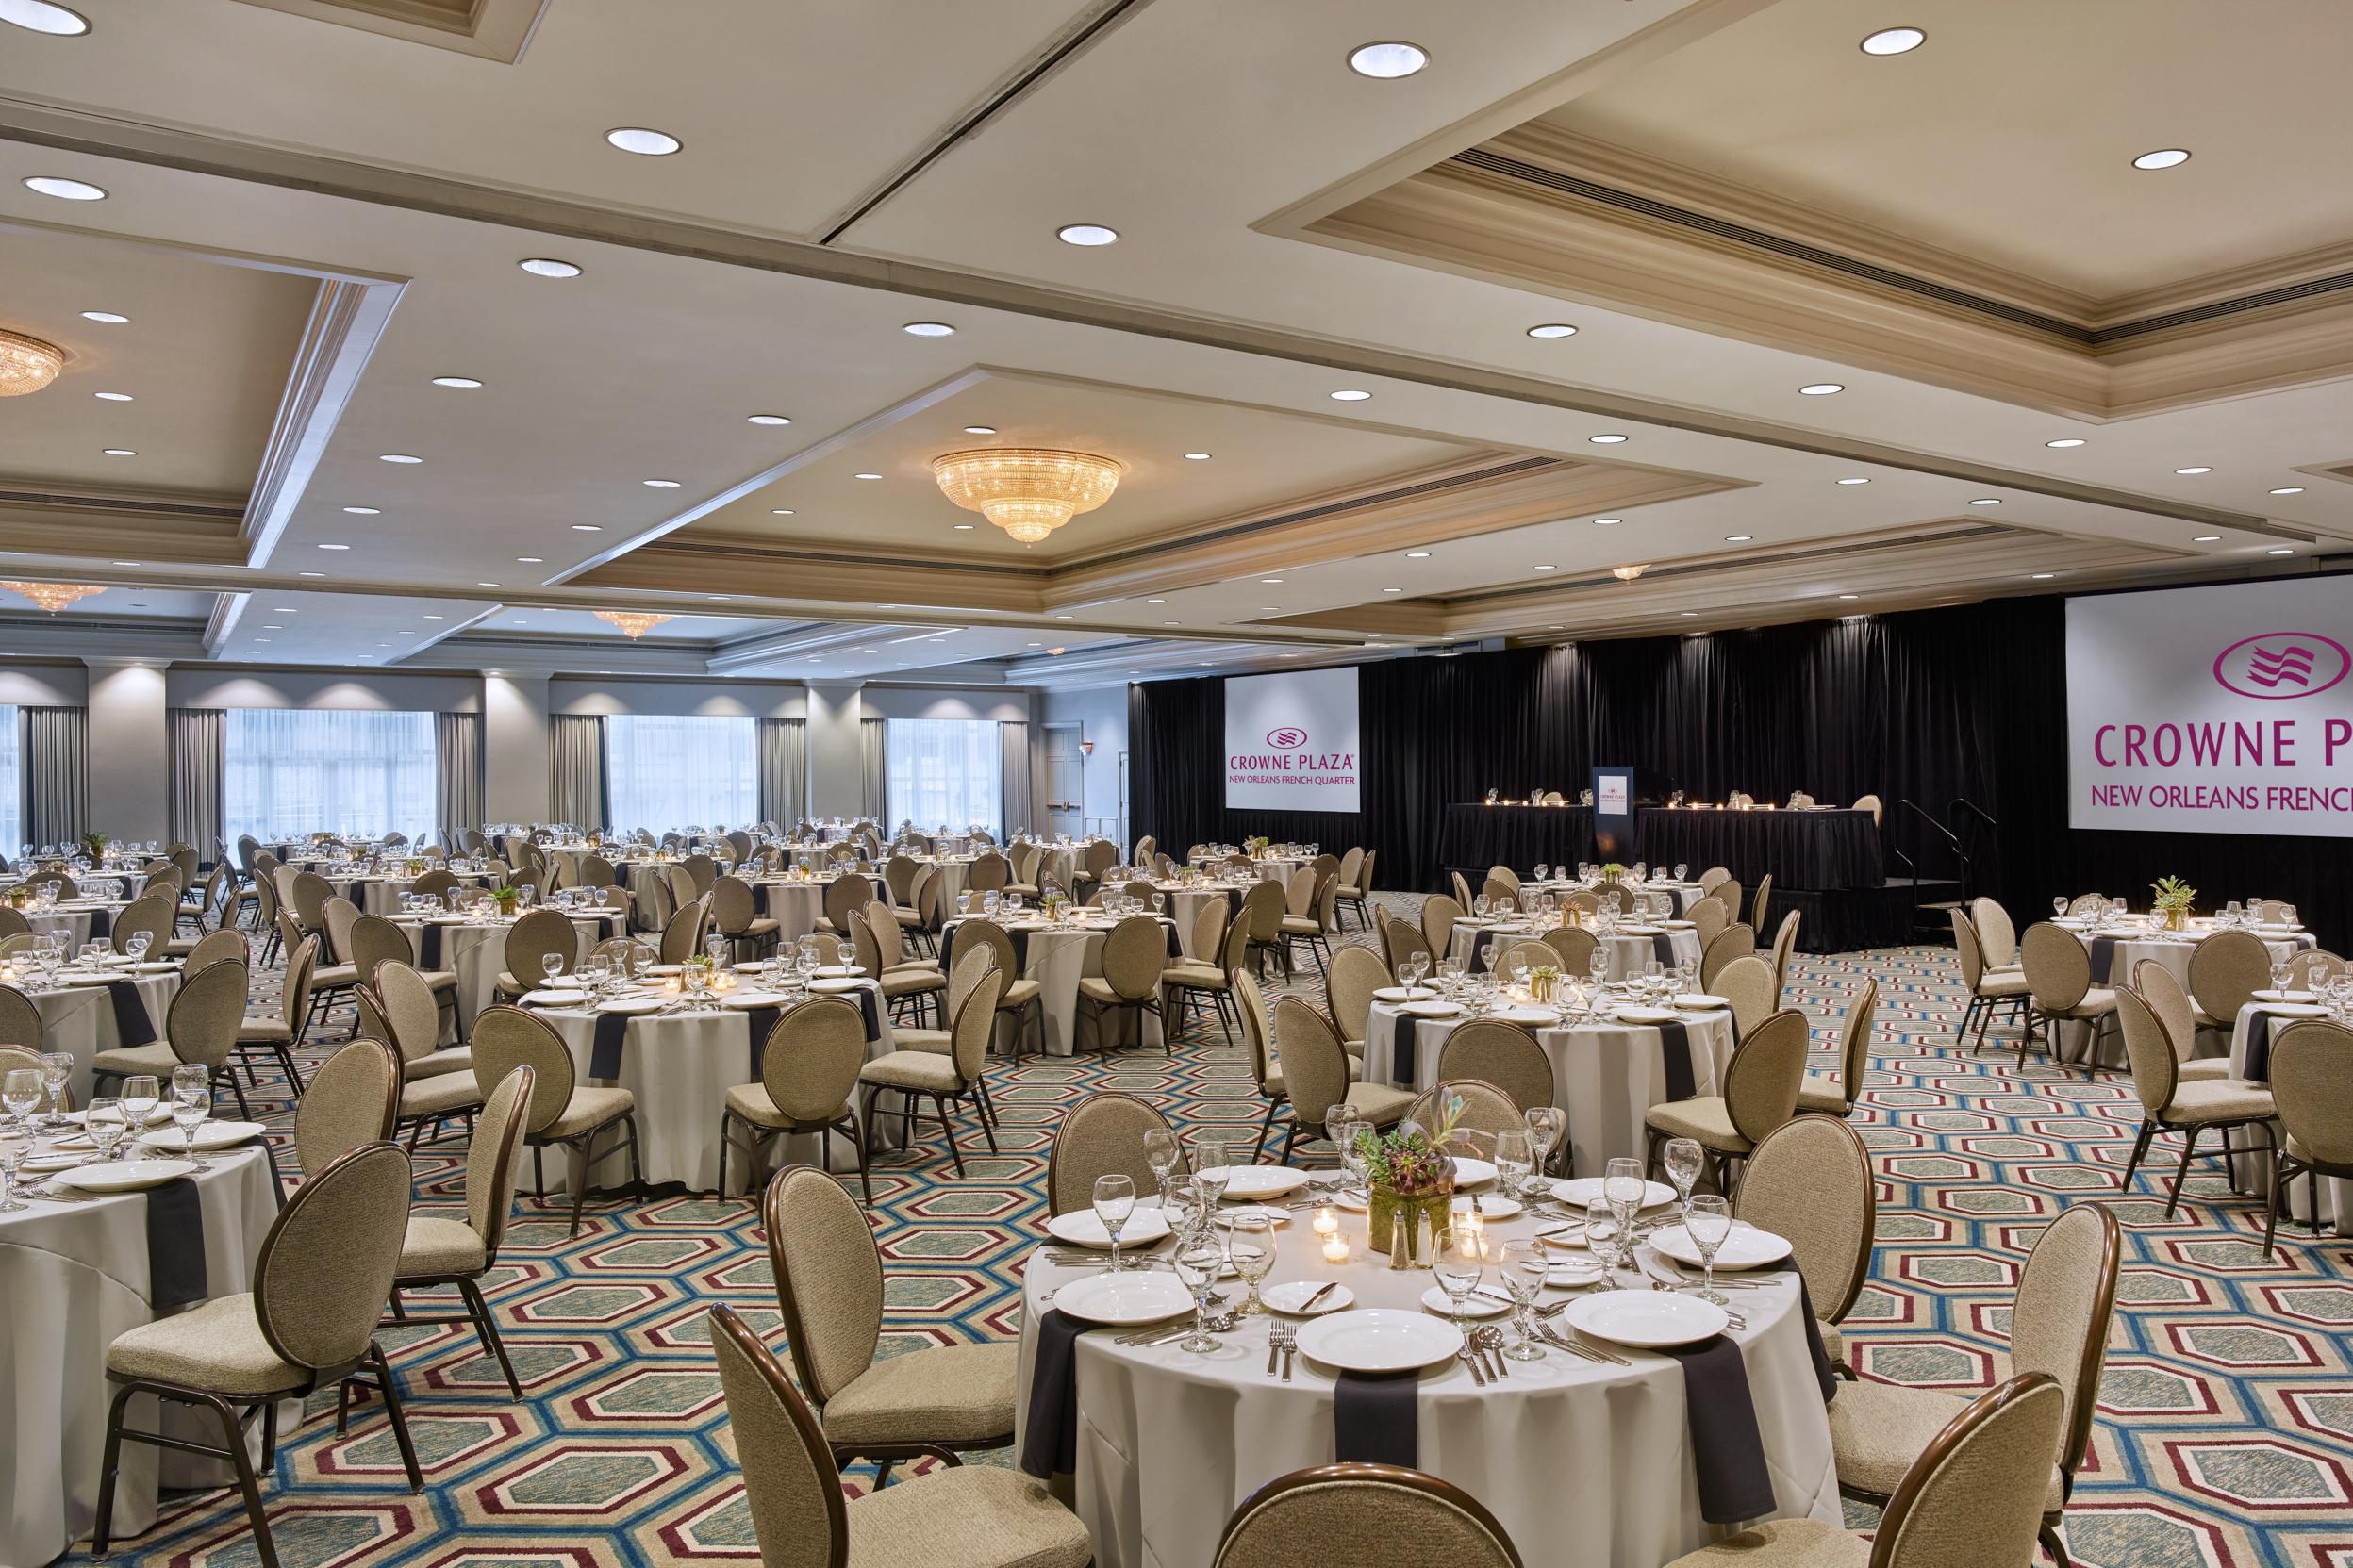 Plan an event in the Grand Ballroom in New Orleans.